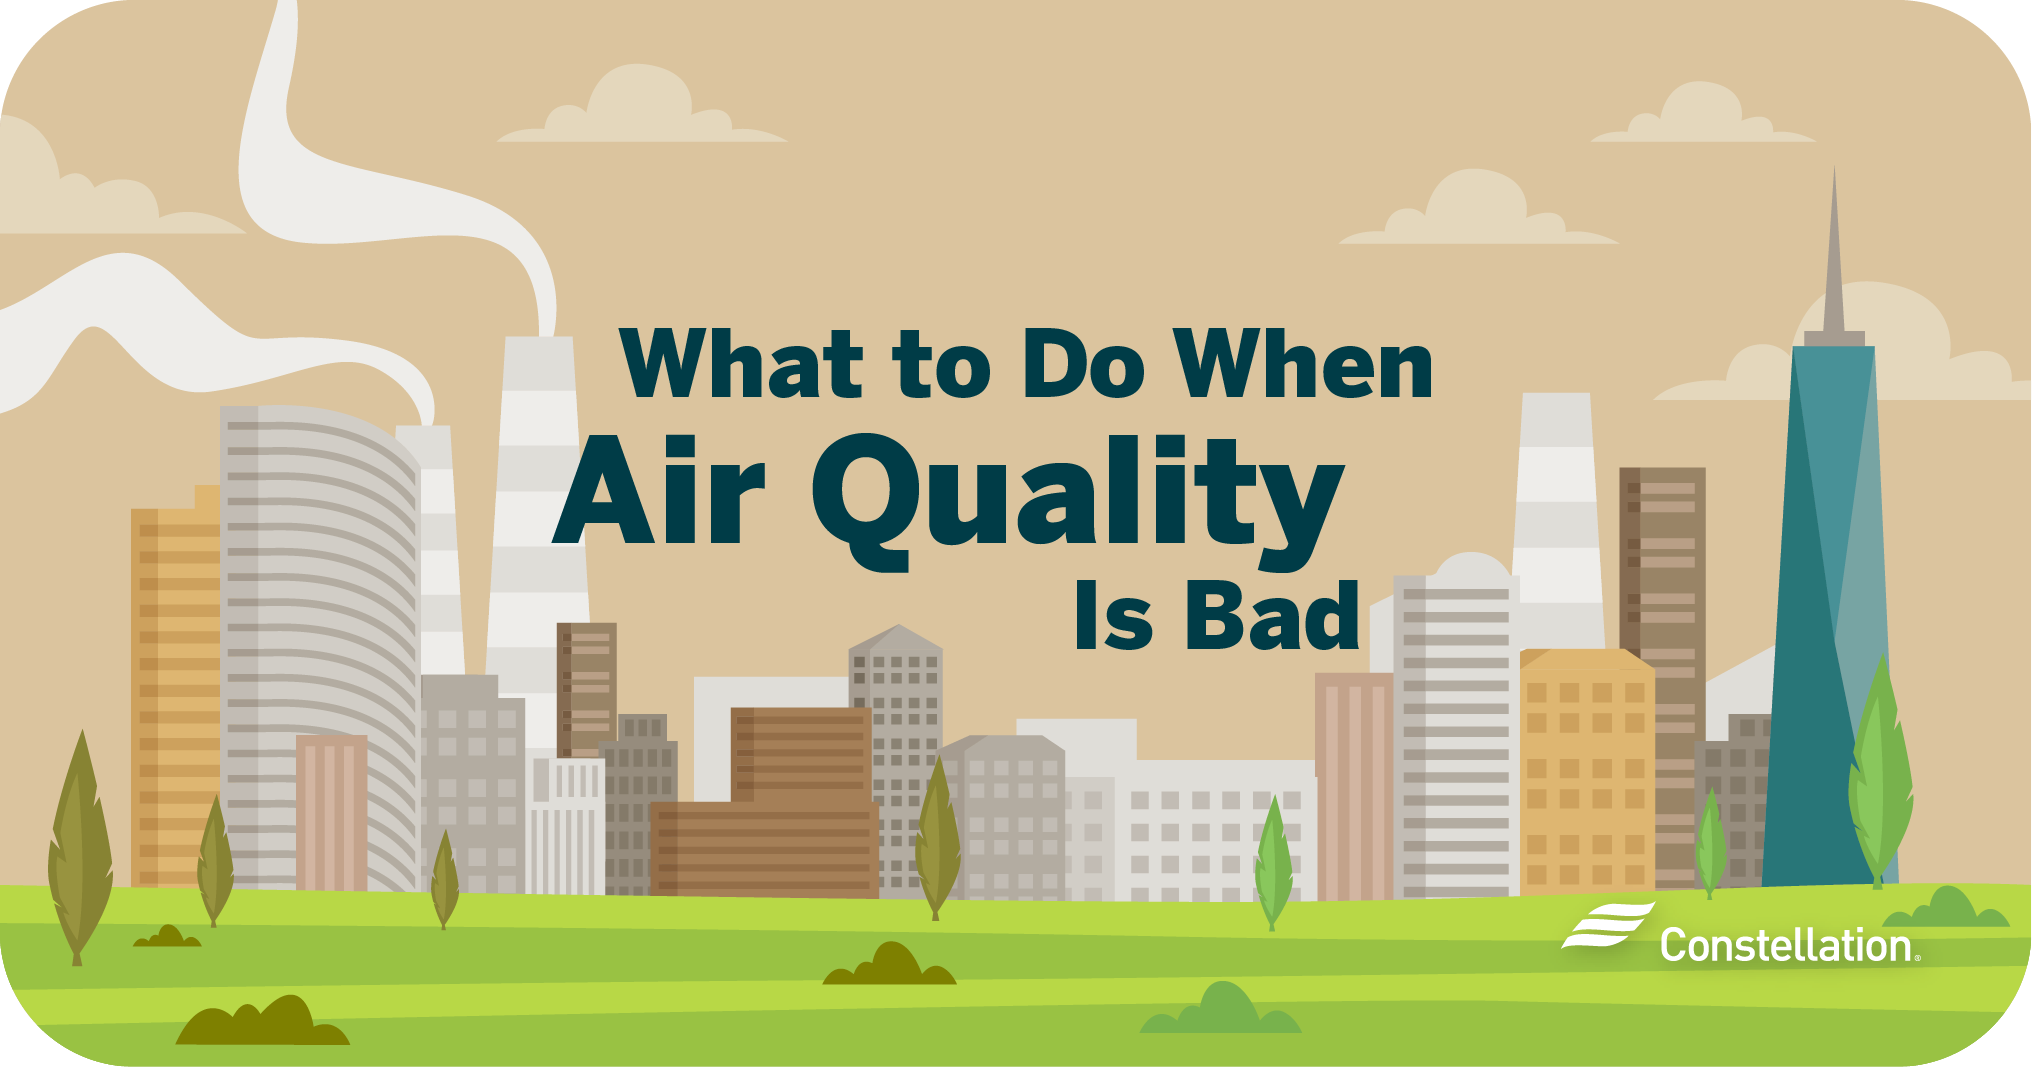 What to do when air quality is bad.